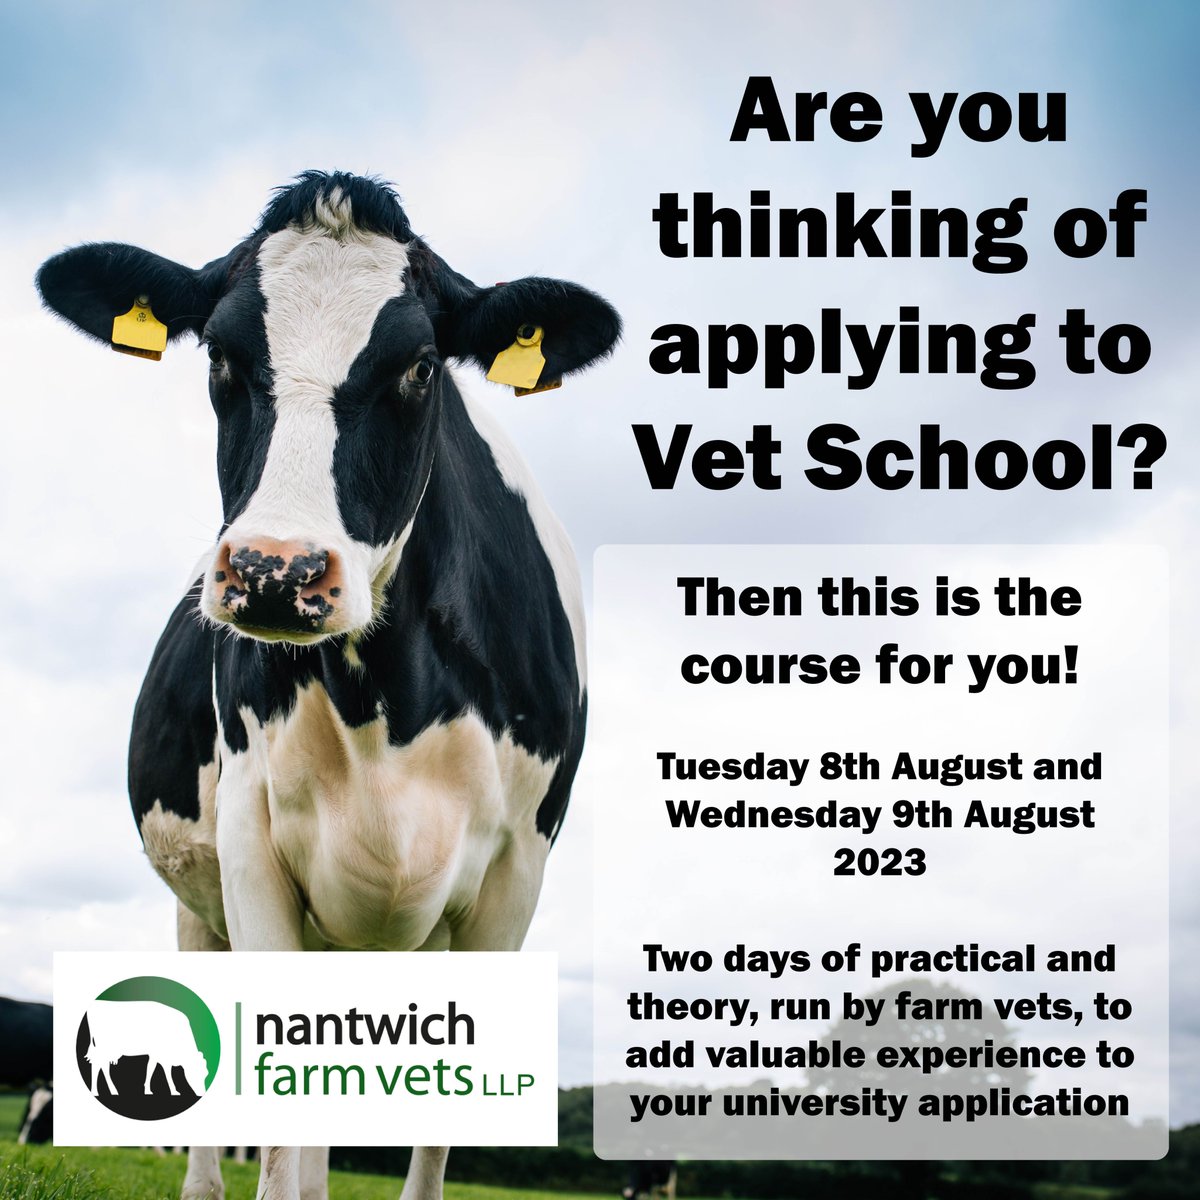 We are very excited to be running our first course aimed specifically at people thinking about applying to Vet School! Running on 8th and 9th August, this course is aimed at providing valuable experience for your university application. nantwichfarmvets.co.uk/students/pre-u…